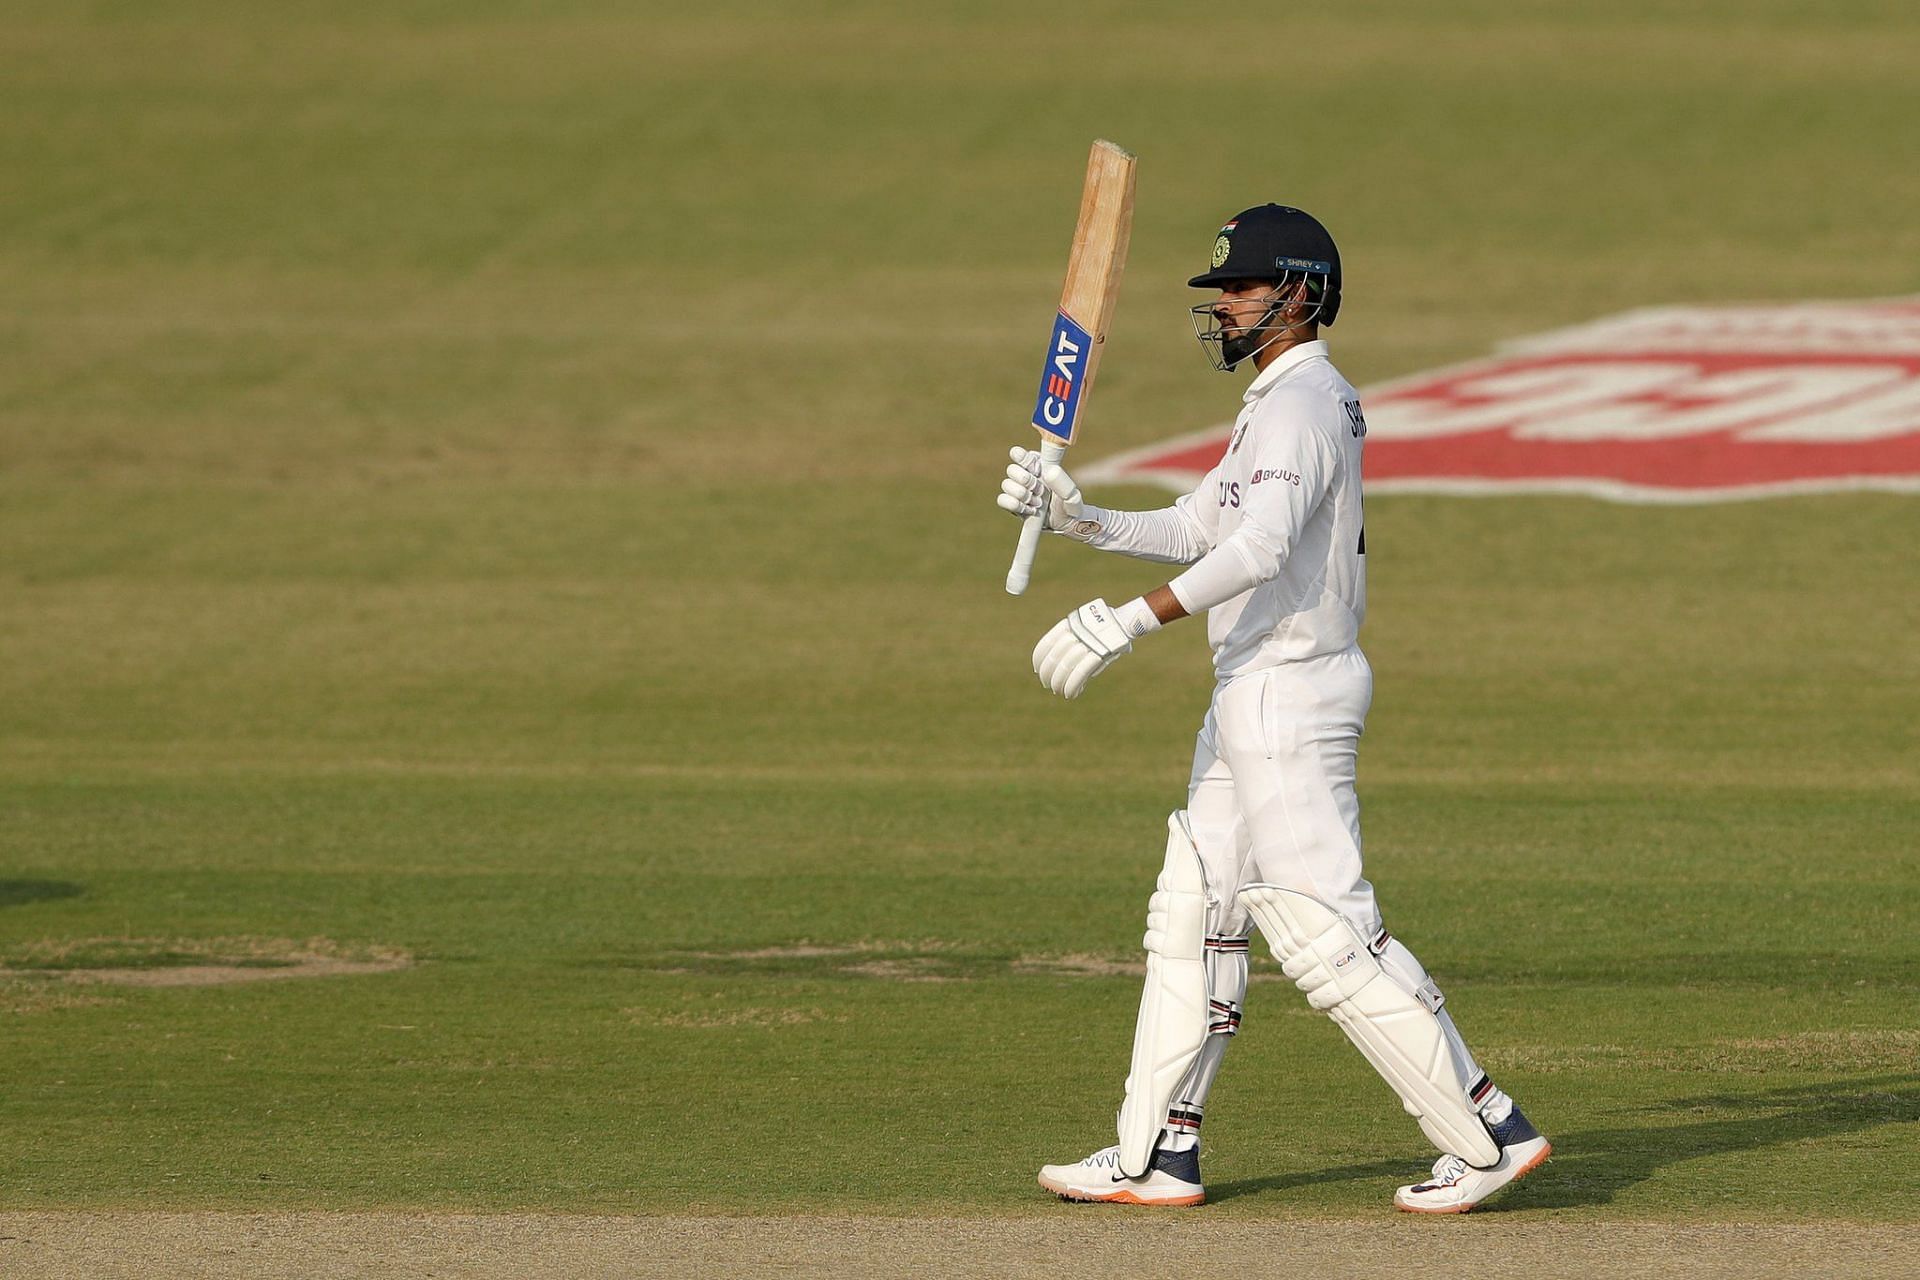 Shreyas Iyer will face his big test in the middle order